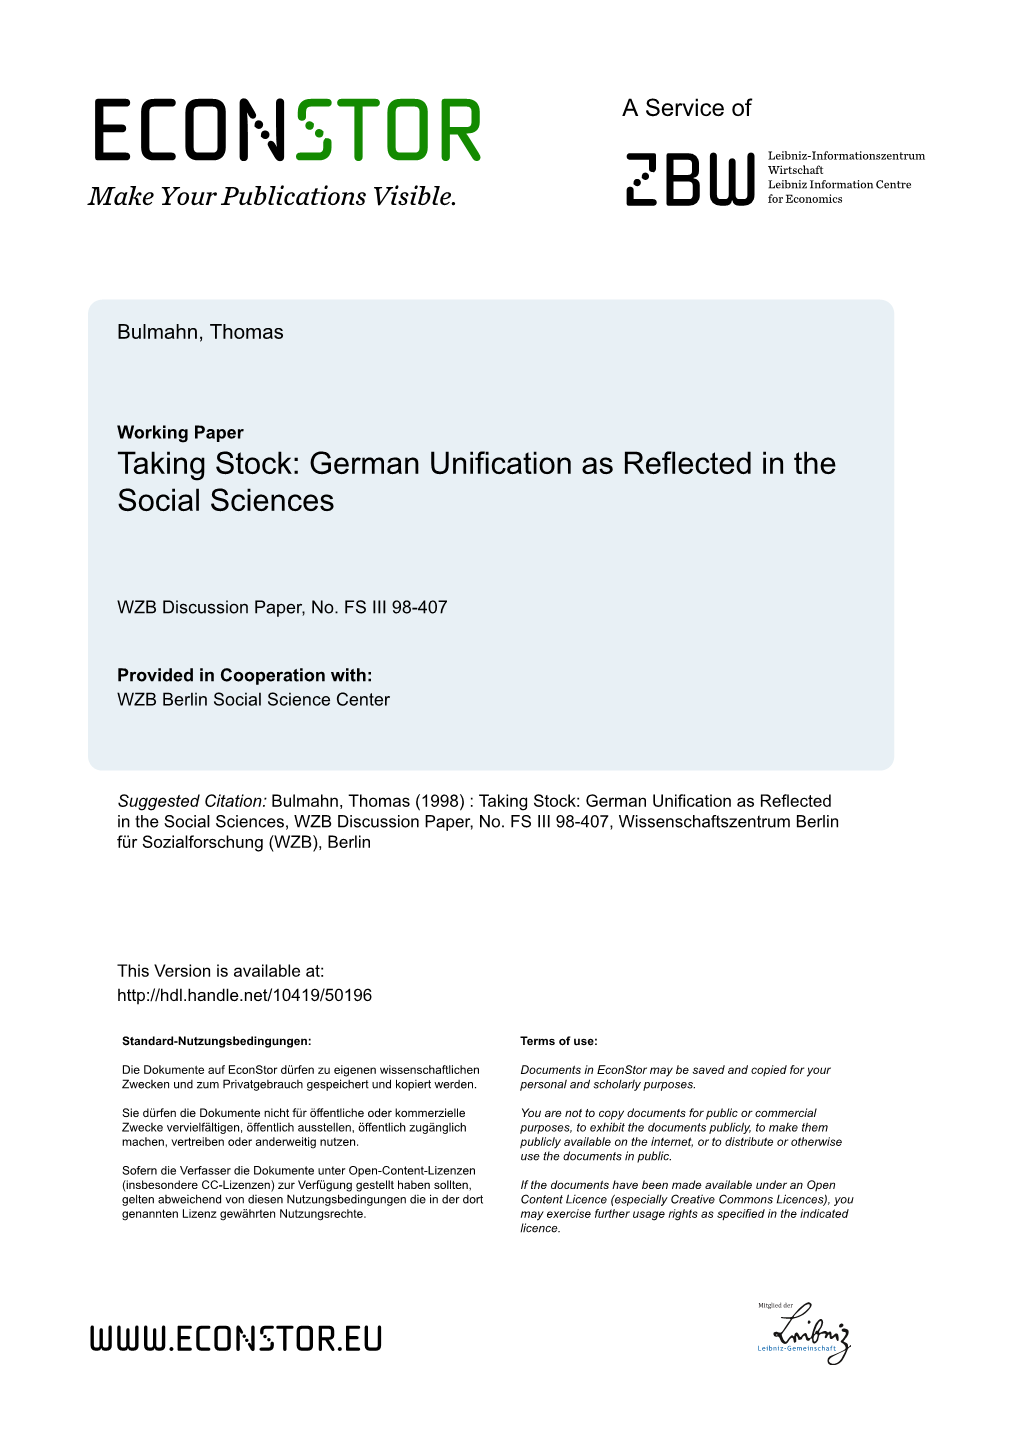 Taking Stock. German Unification As Reflected in the Social